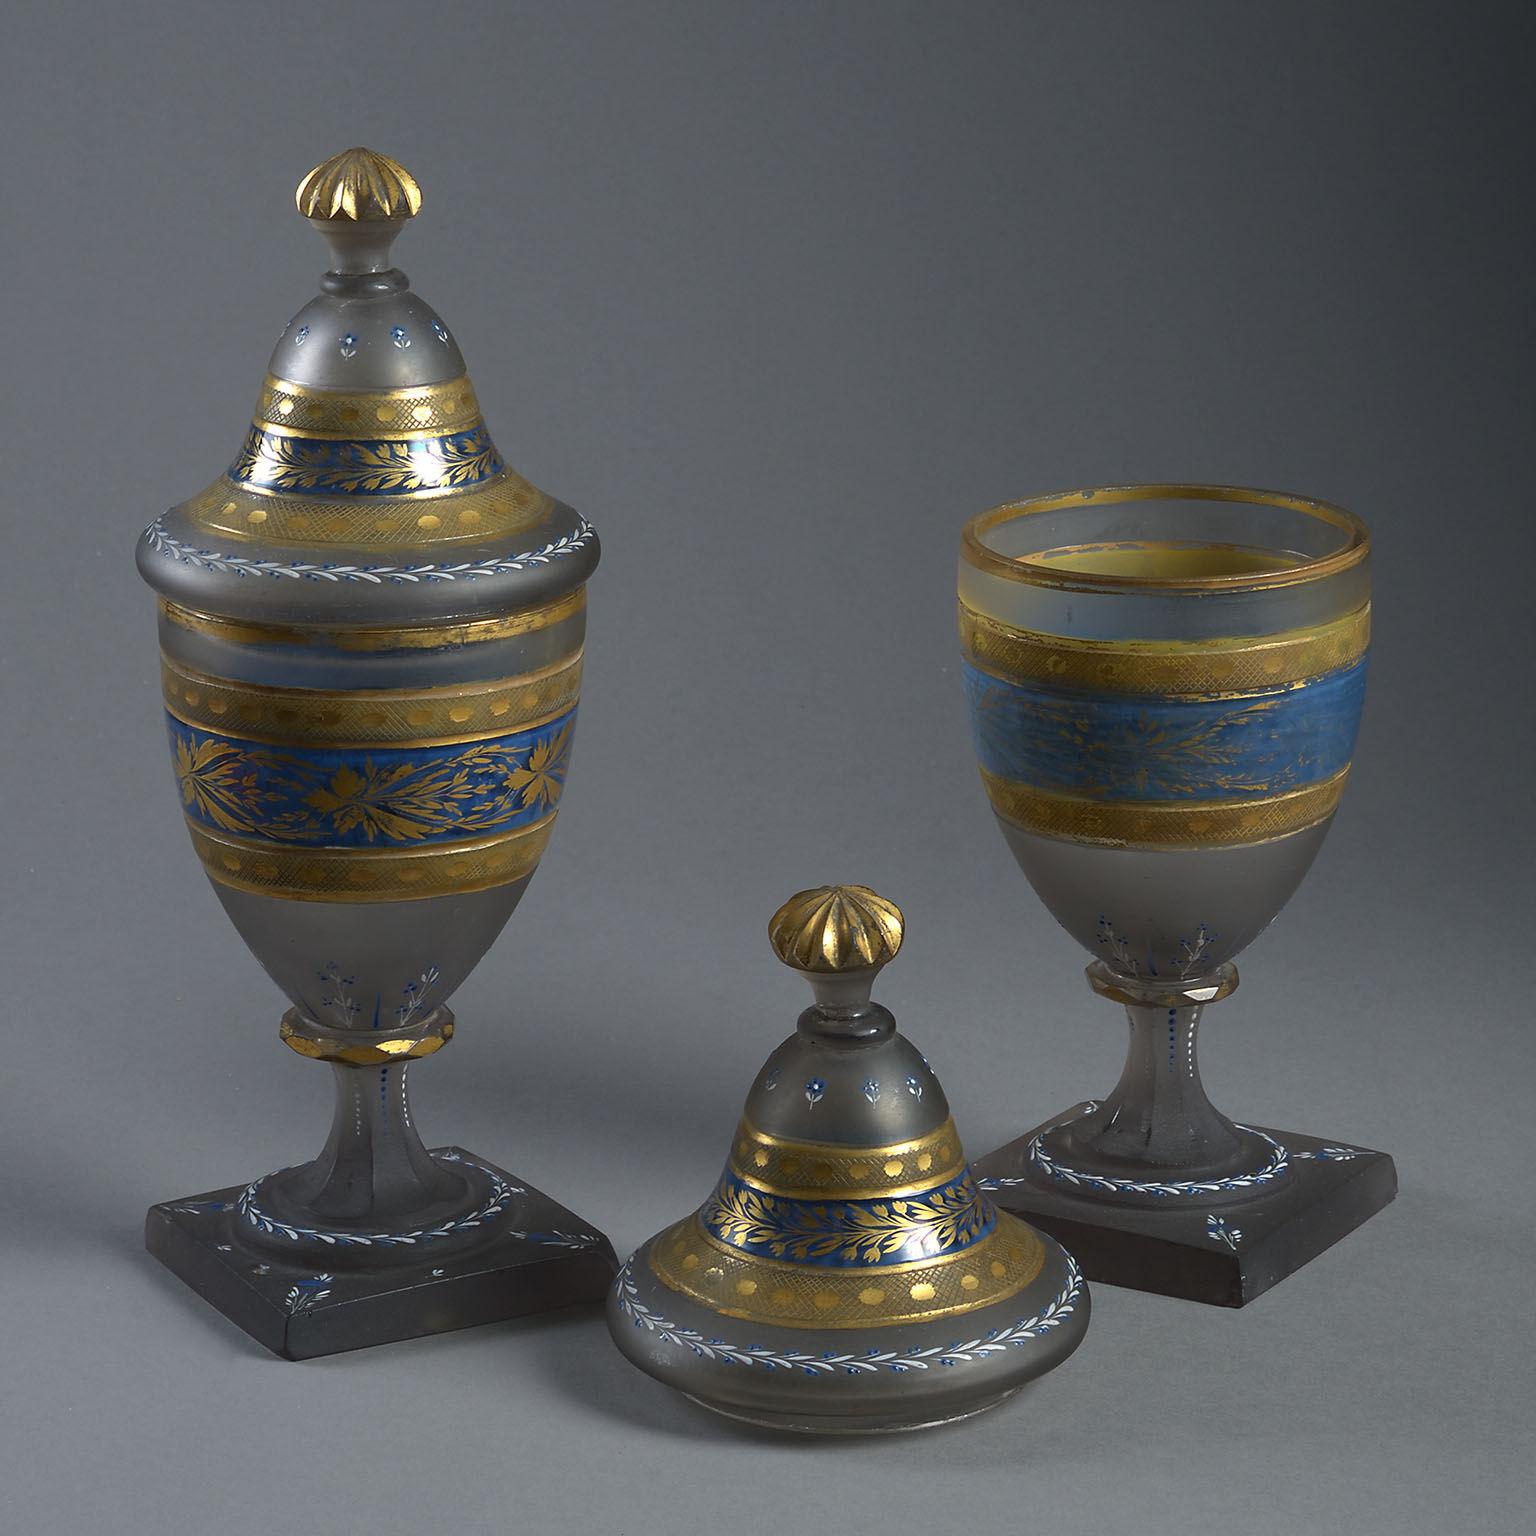 The urn shaped form decorated with bands of engraved and gilt foliage on a frosted and partly blue-painted ground.